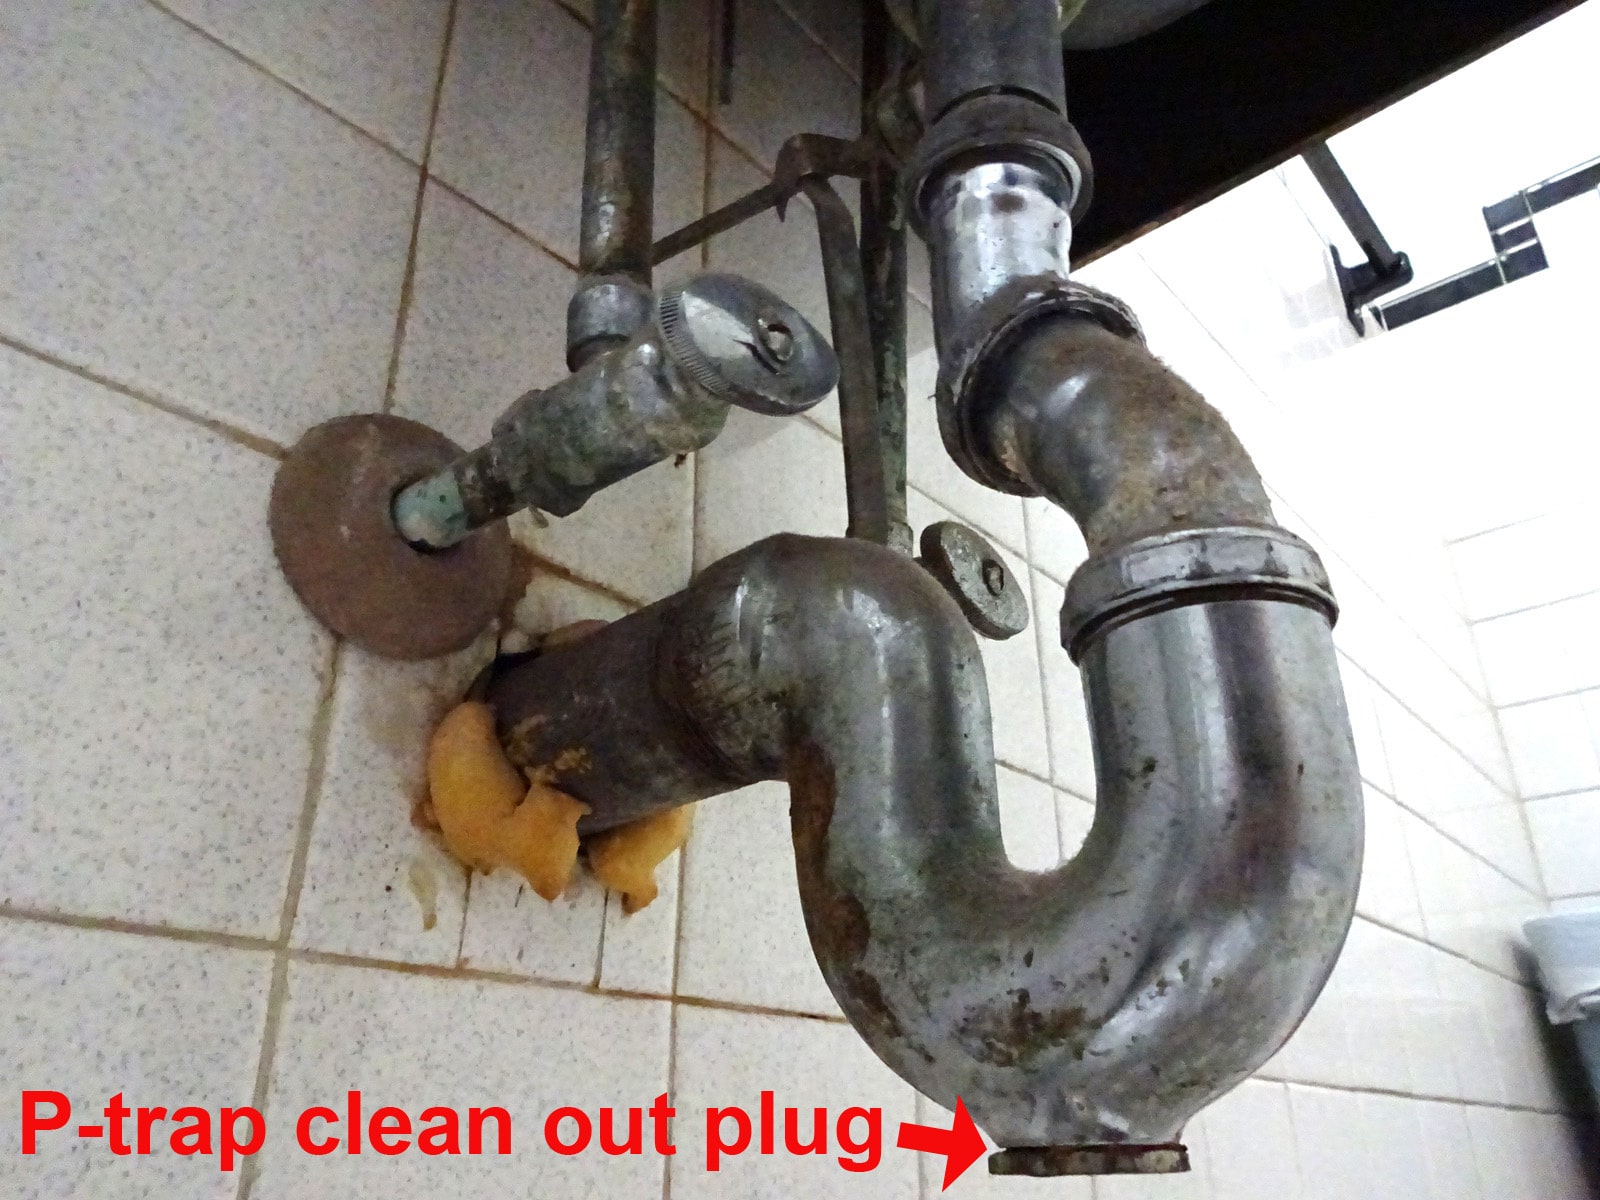 Knowing How To Fix A Clogged Sink ls Is Vital For Every